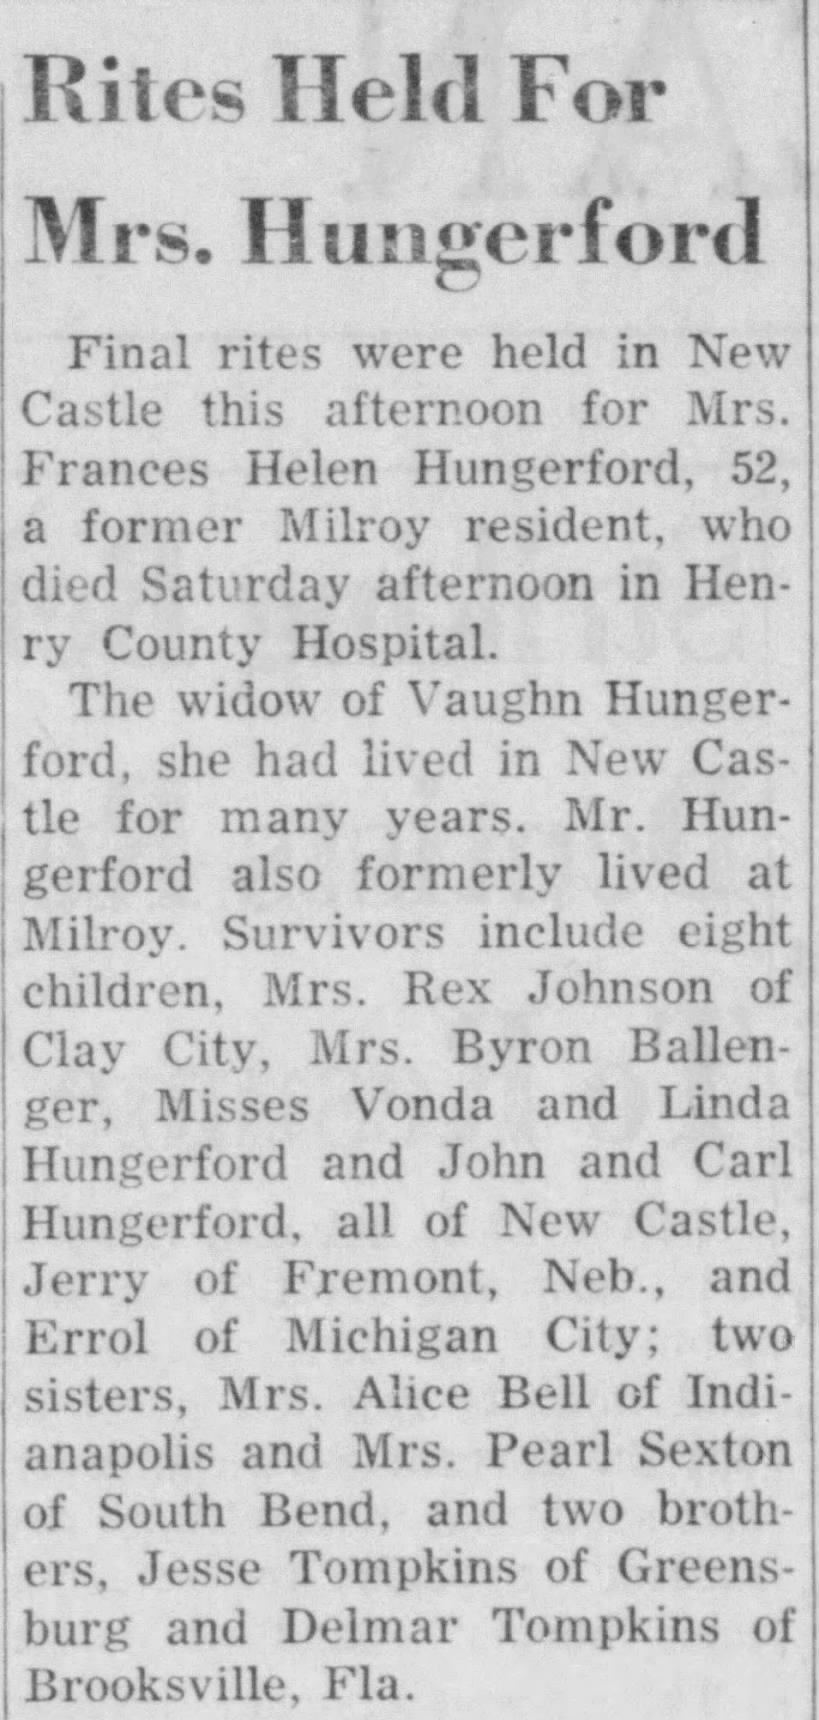 Obituary - Frances Helen Hungerford. Rushville Republican (Rushville, IN) 7 Apr 1964, Page 2